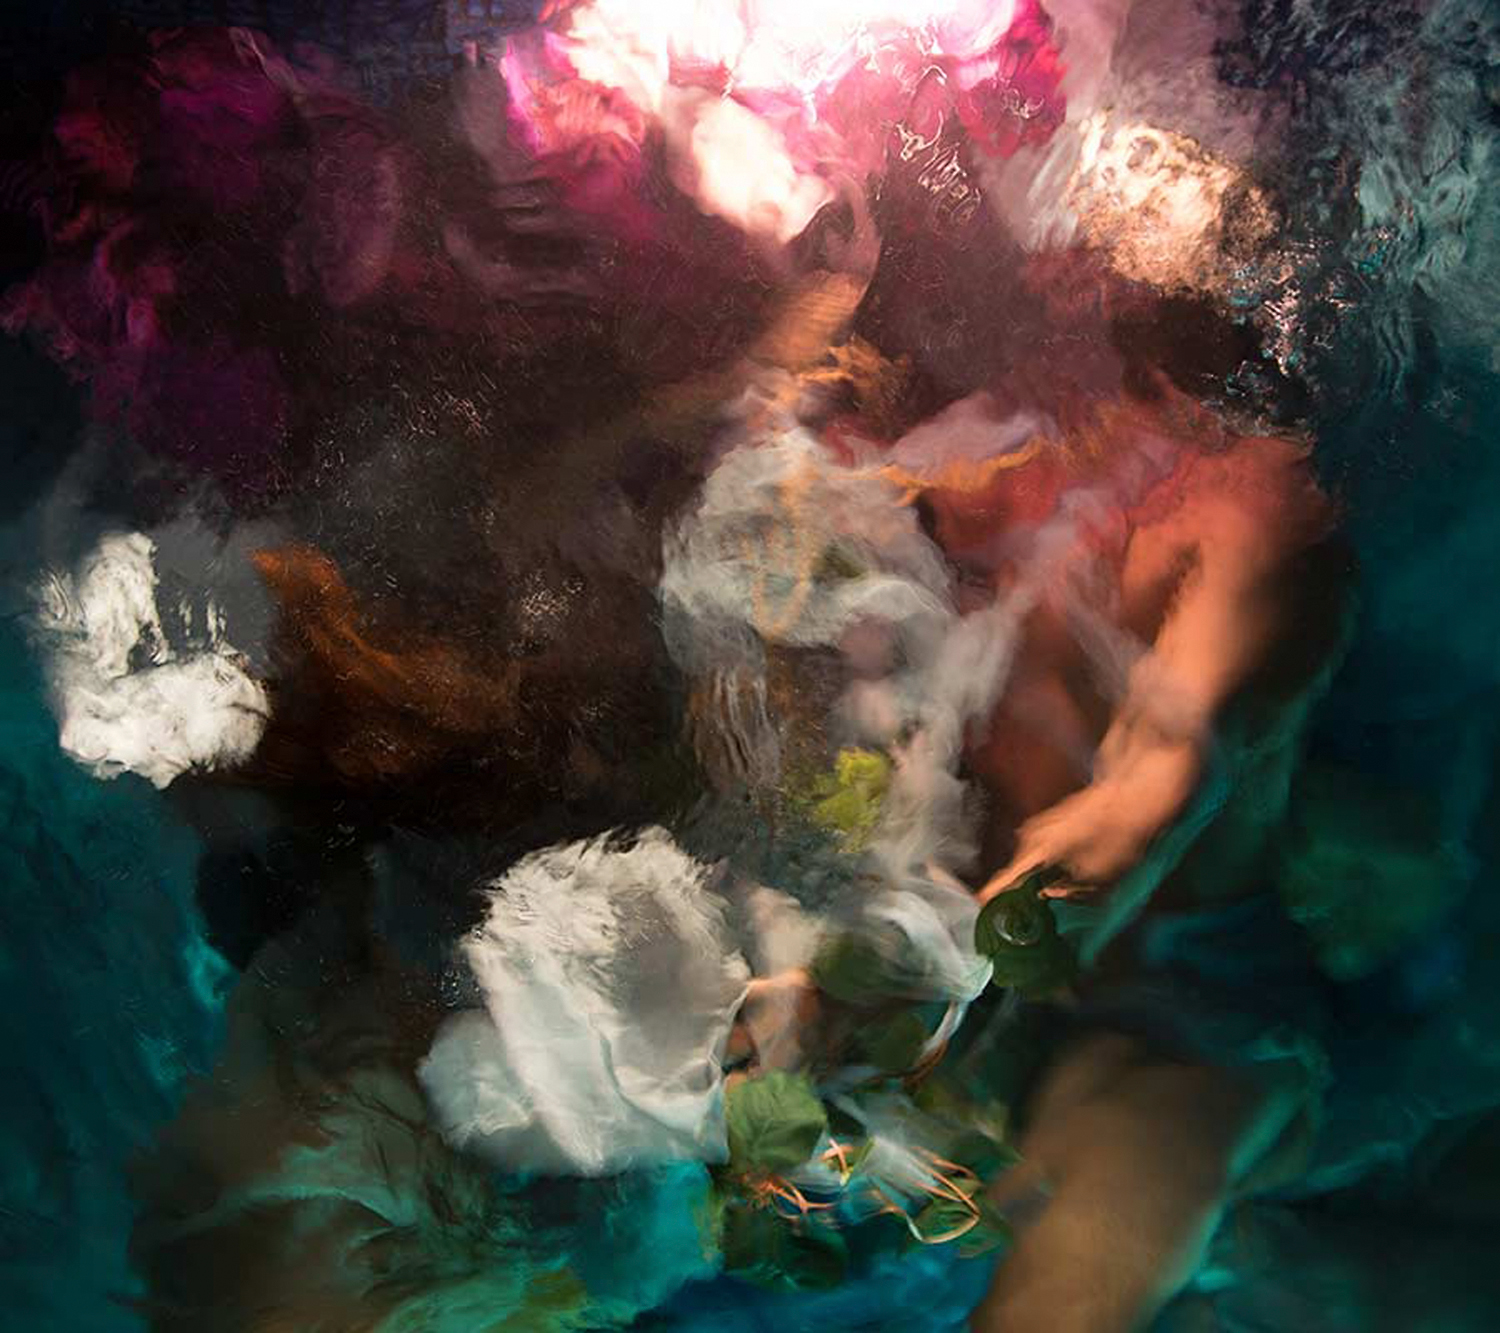 Christy Lee Rogers, The Unknown, 2016, Edition of 5. Archival Pigment Print, 58 x 65¼ inches. Courtesy of the artist and Miller Gallery, Cincinnati, Ohio